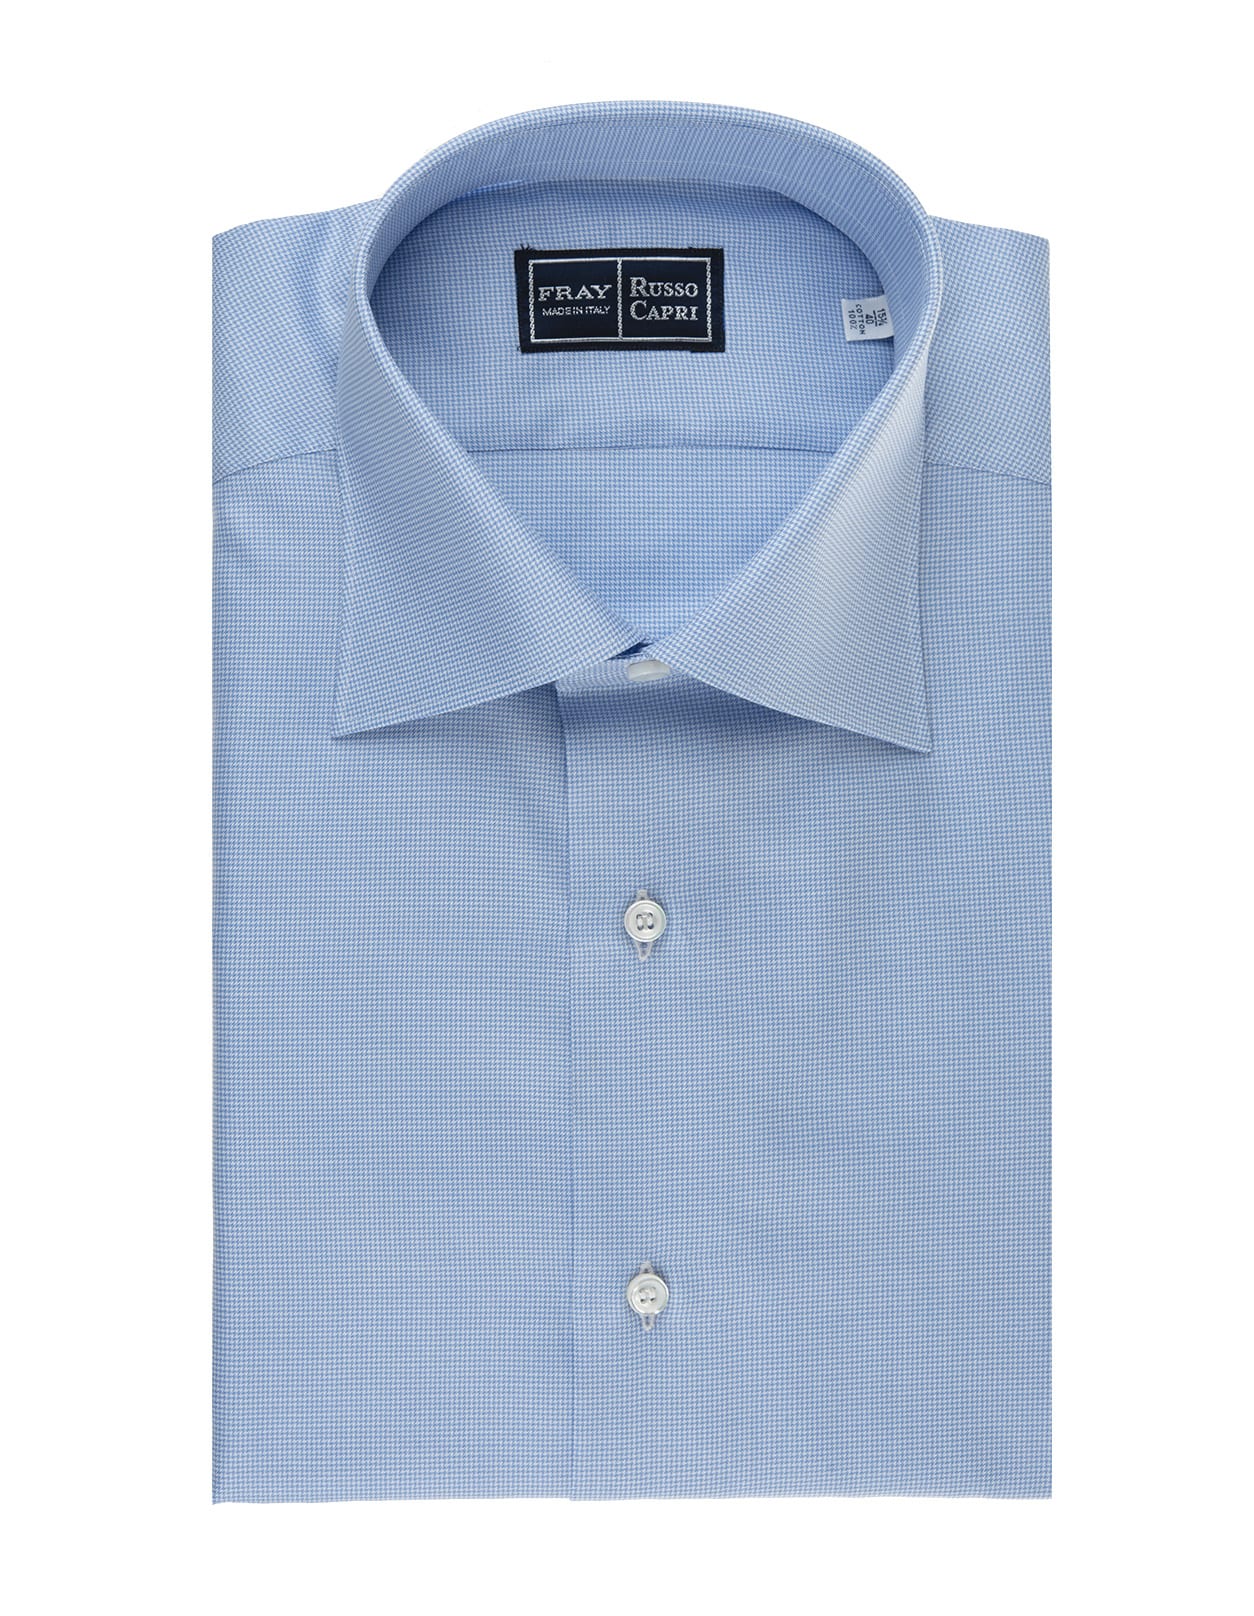 Regular Fit Shirt In White And Light Blue Oxford Cotton